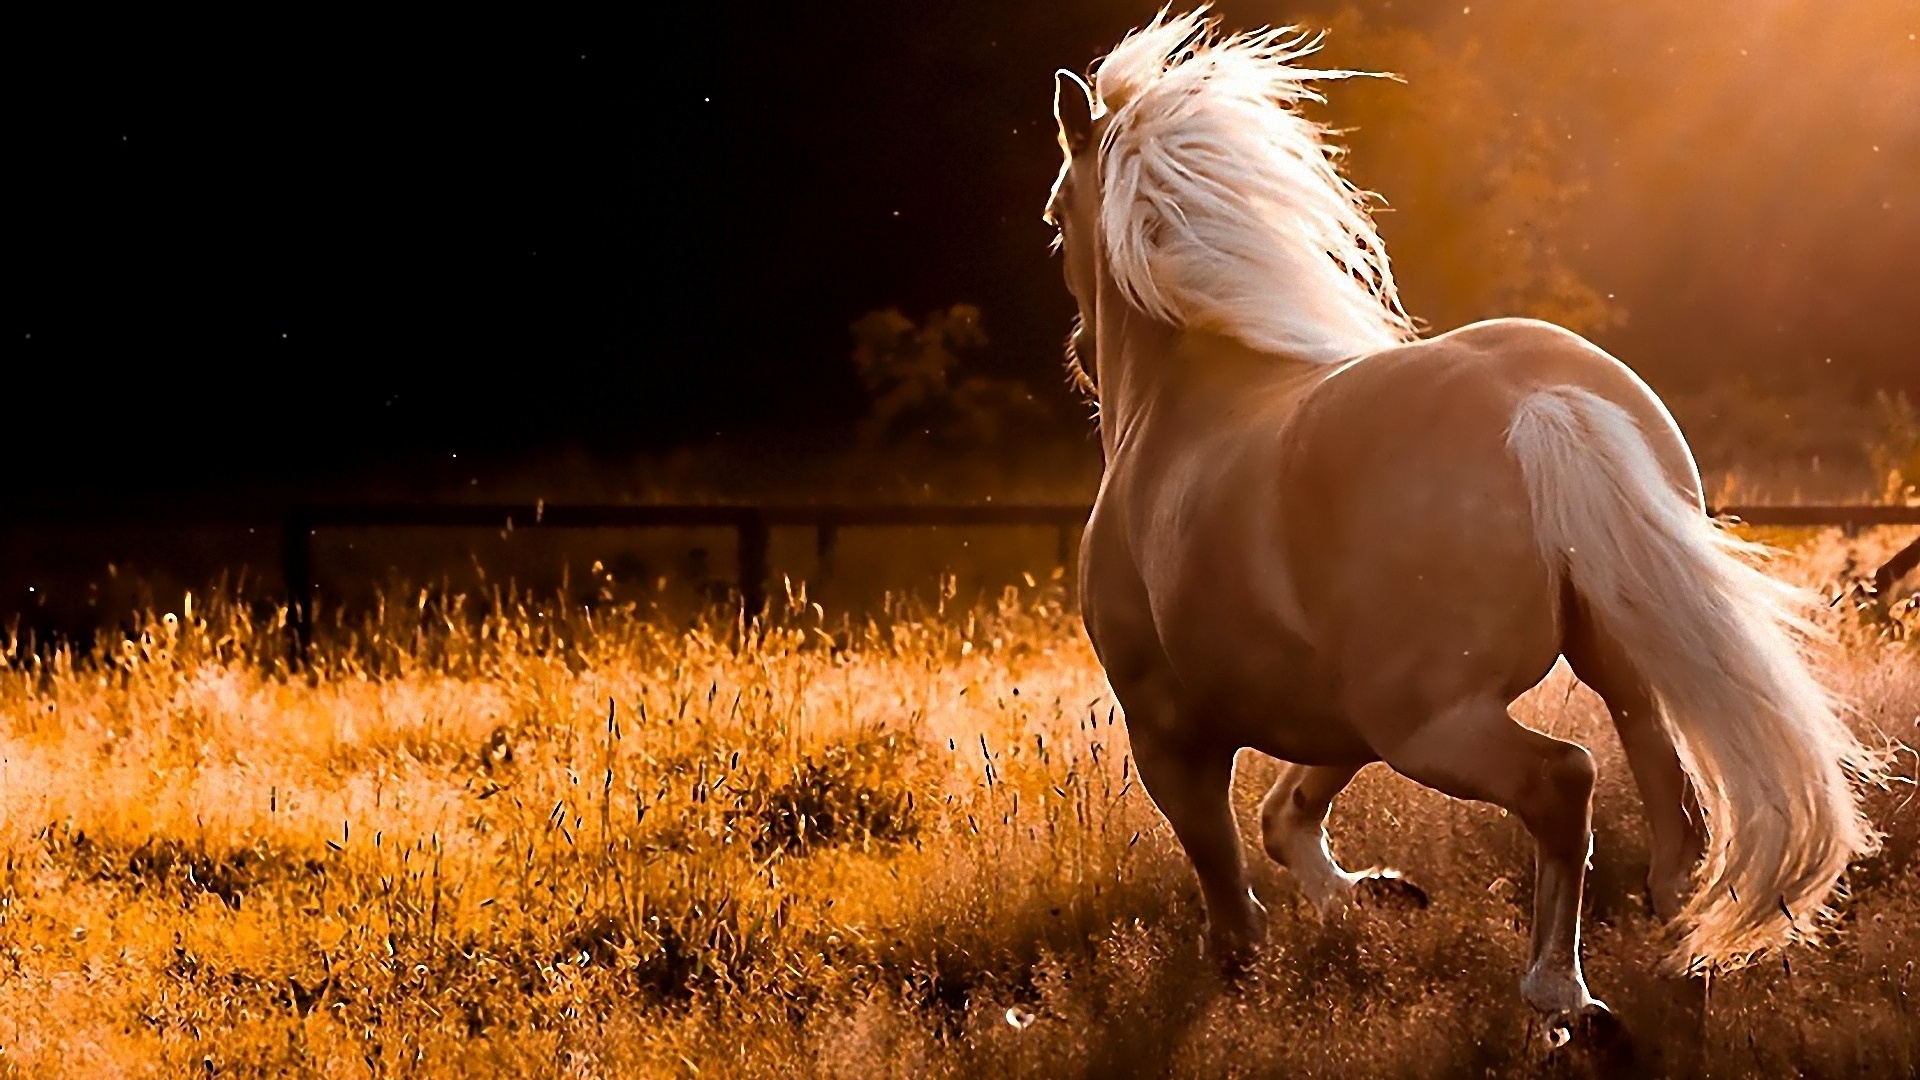 wallpapers running horse wallpapers running horse hd wallpapers 1920x1080